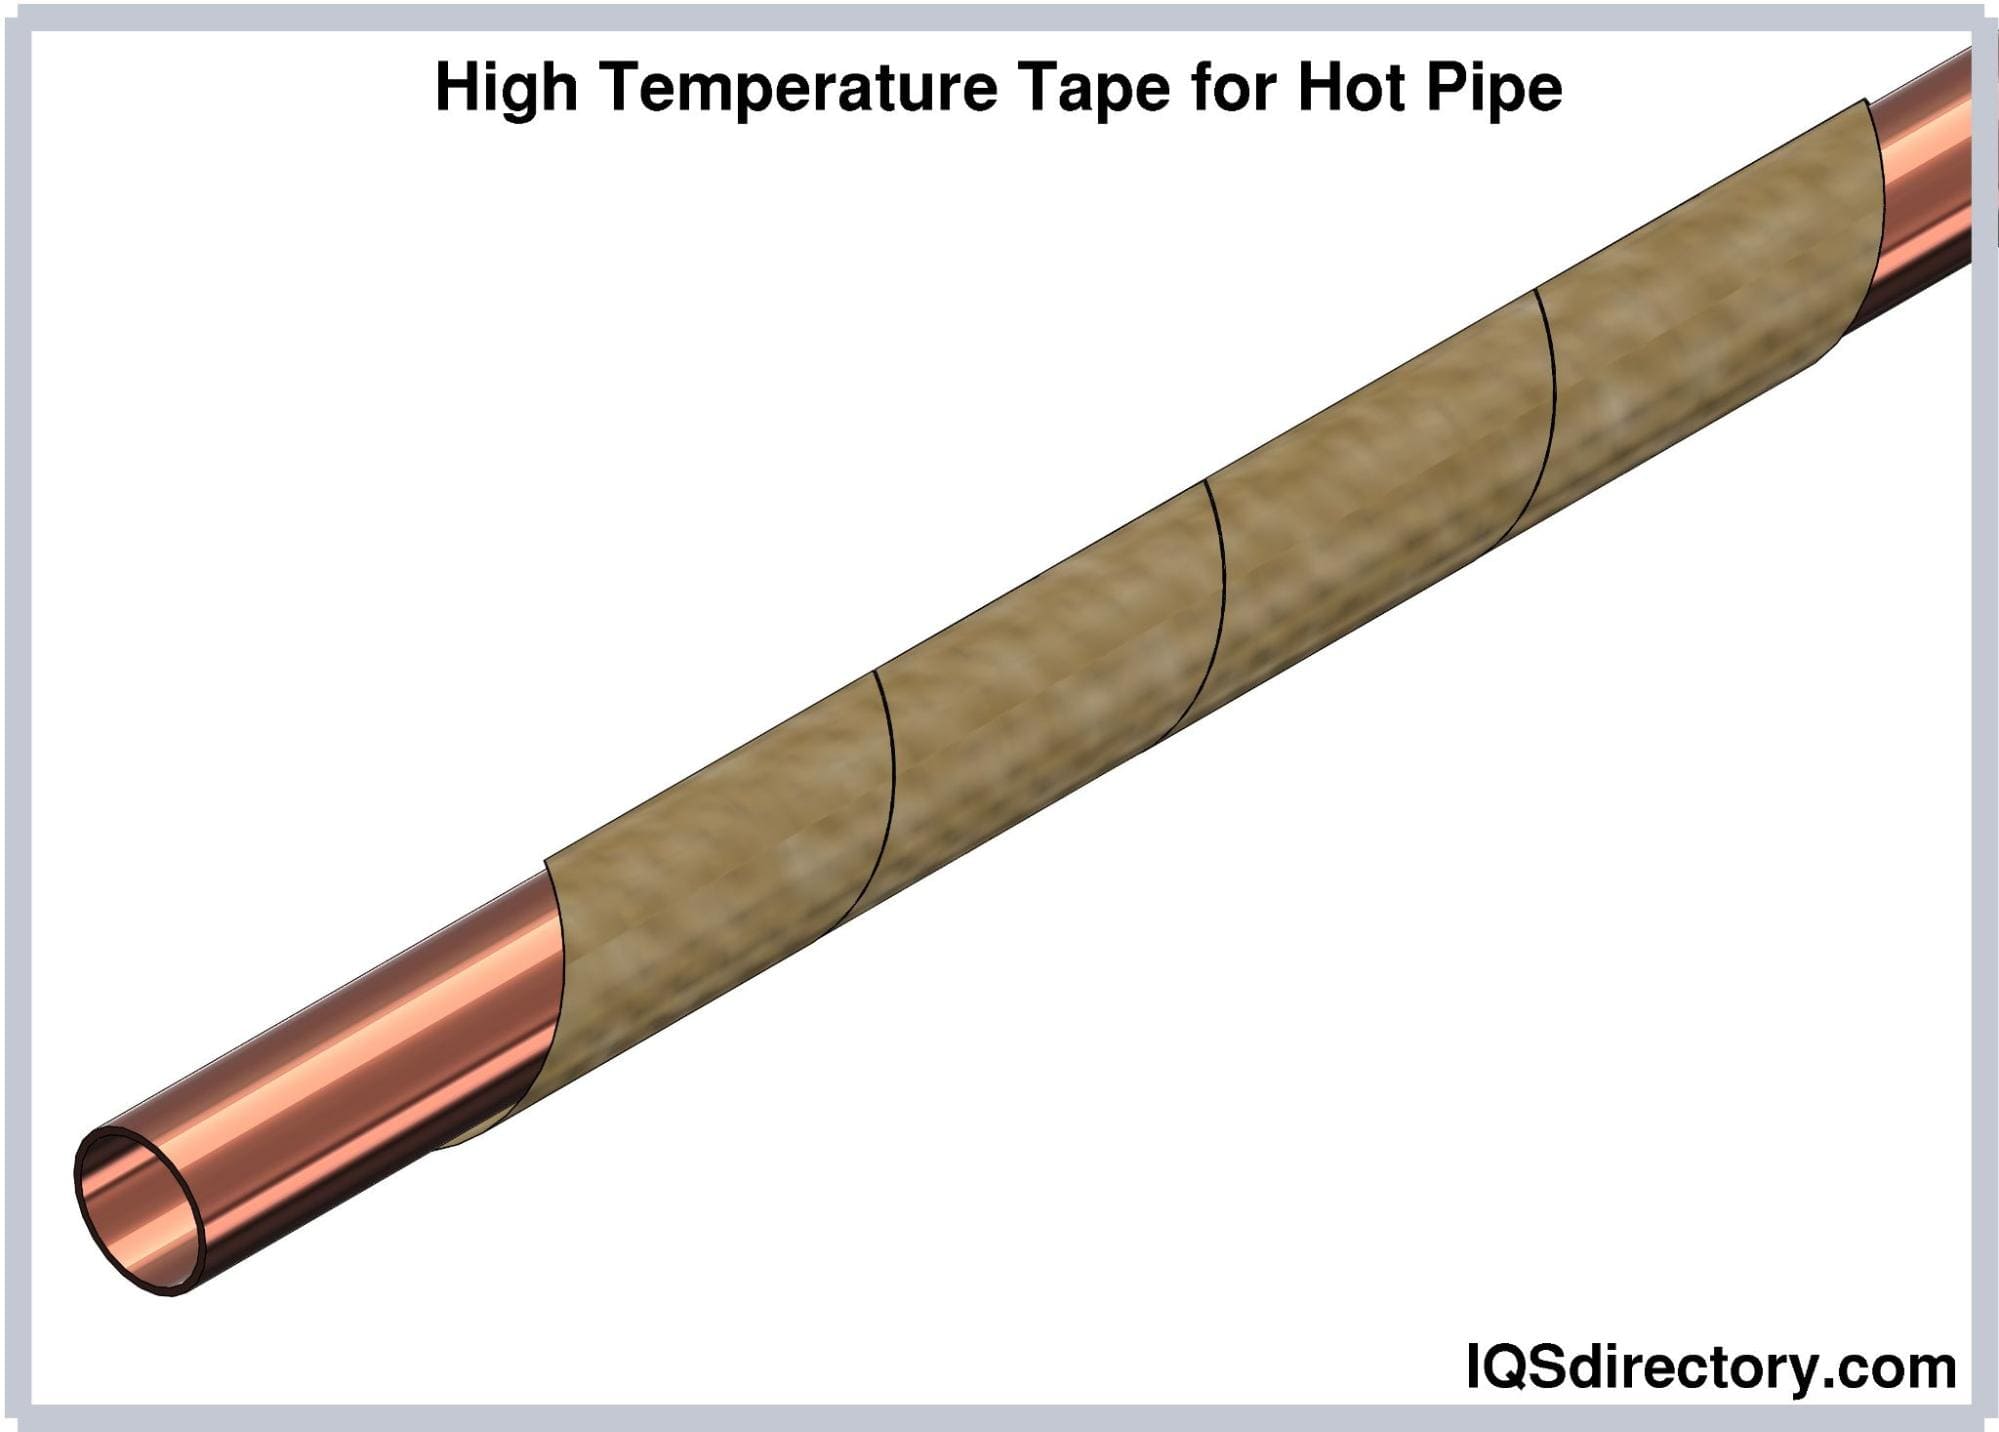 High Temperature Tape for Hot Pipe